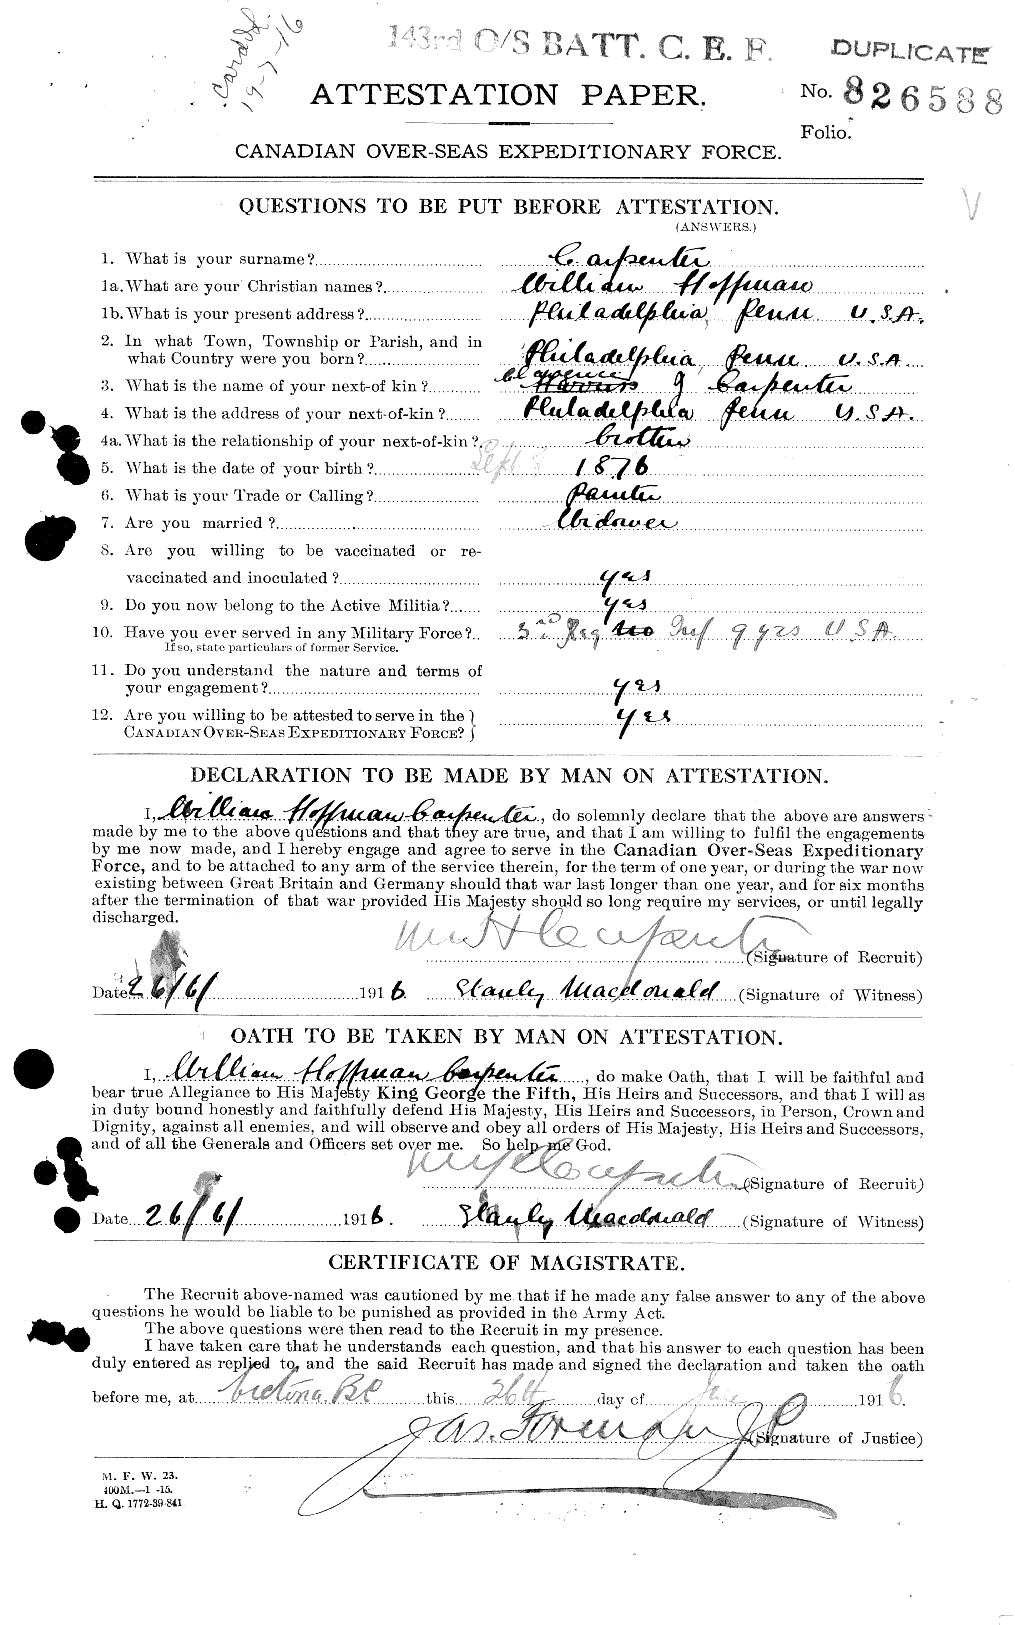 Personnel Records of the First World War - CEF 010236a